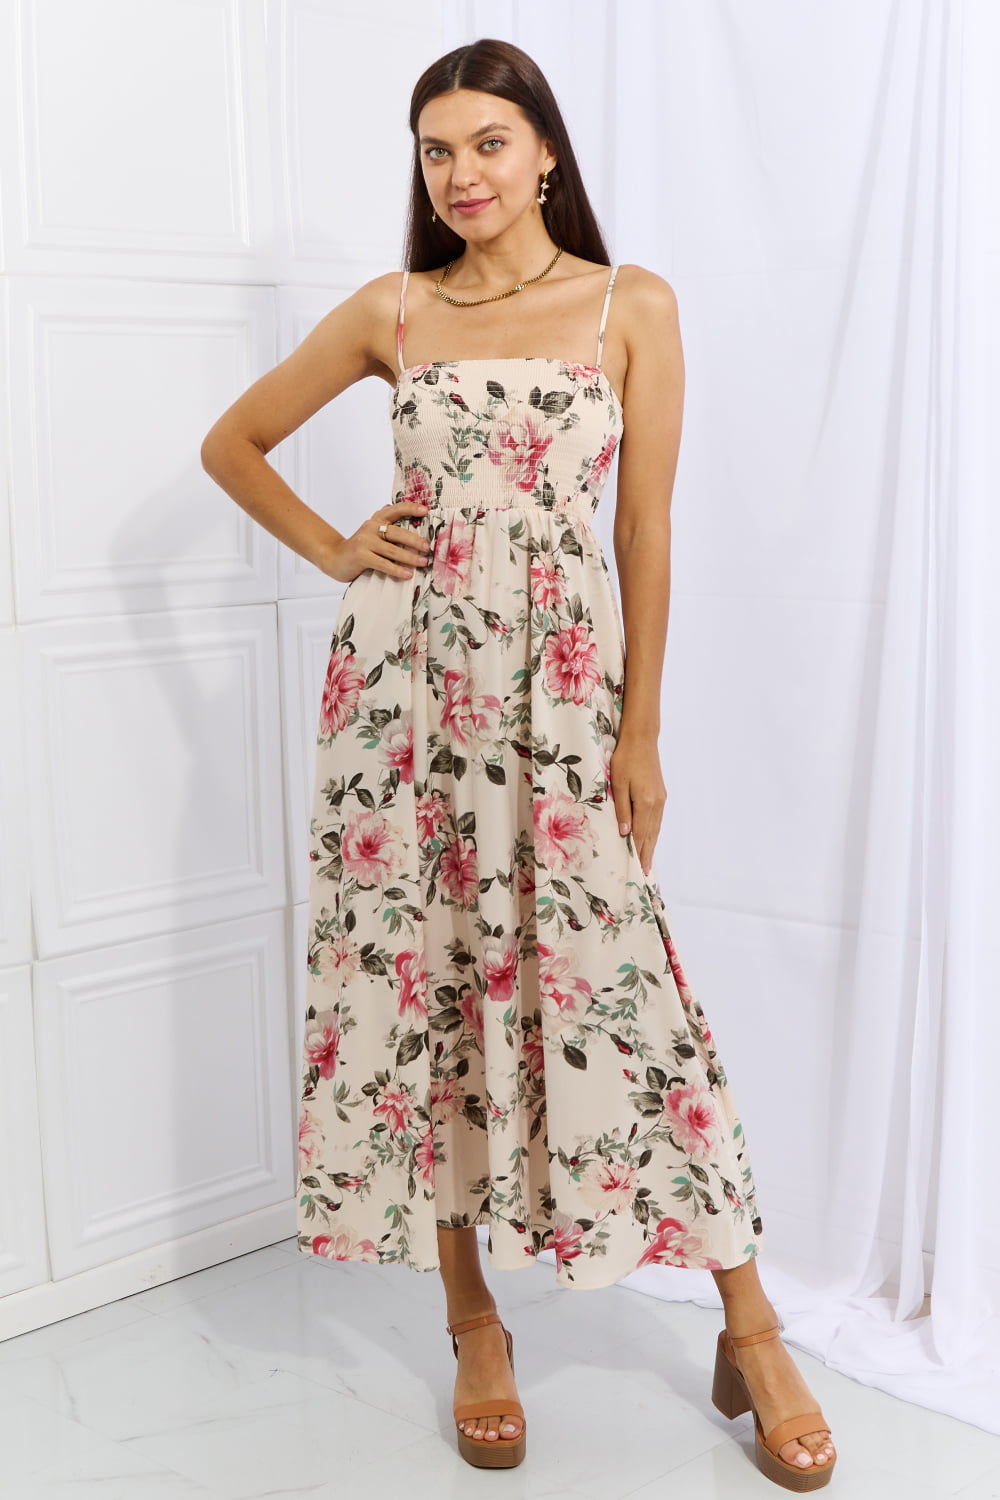 Light Gray OneTheLand Hold Me Tight Sleevless Floral Maxi Dress in Pink Sentient Beauty Fashions Apparel & Accessories